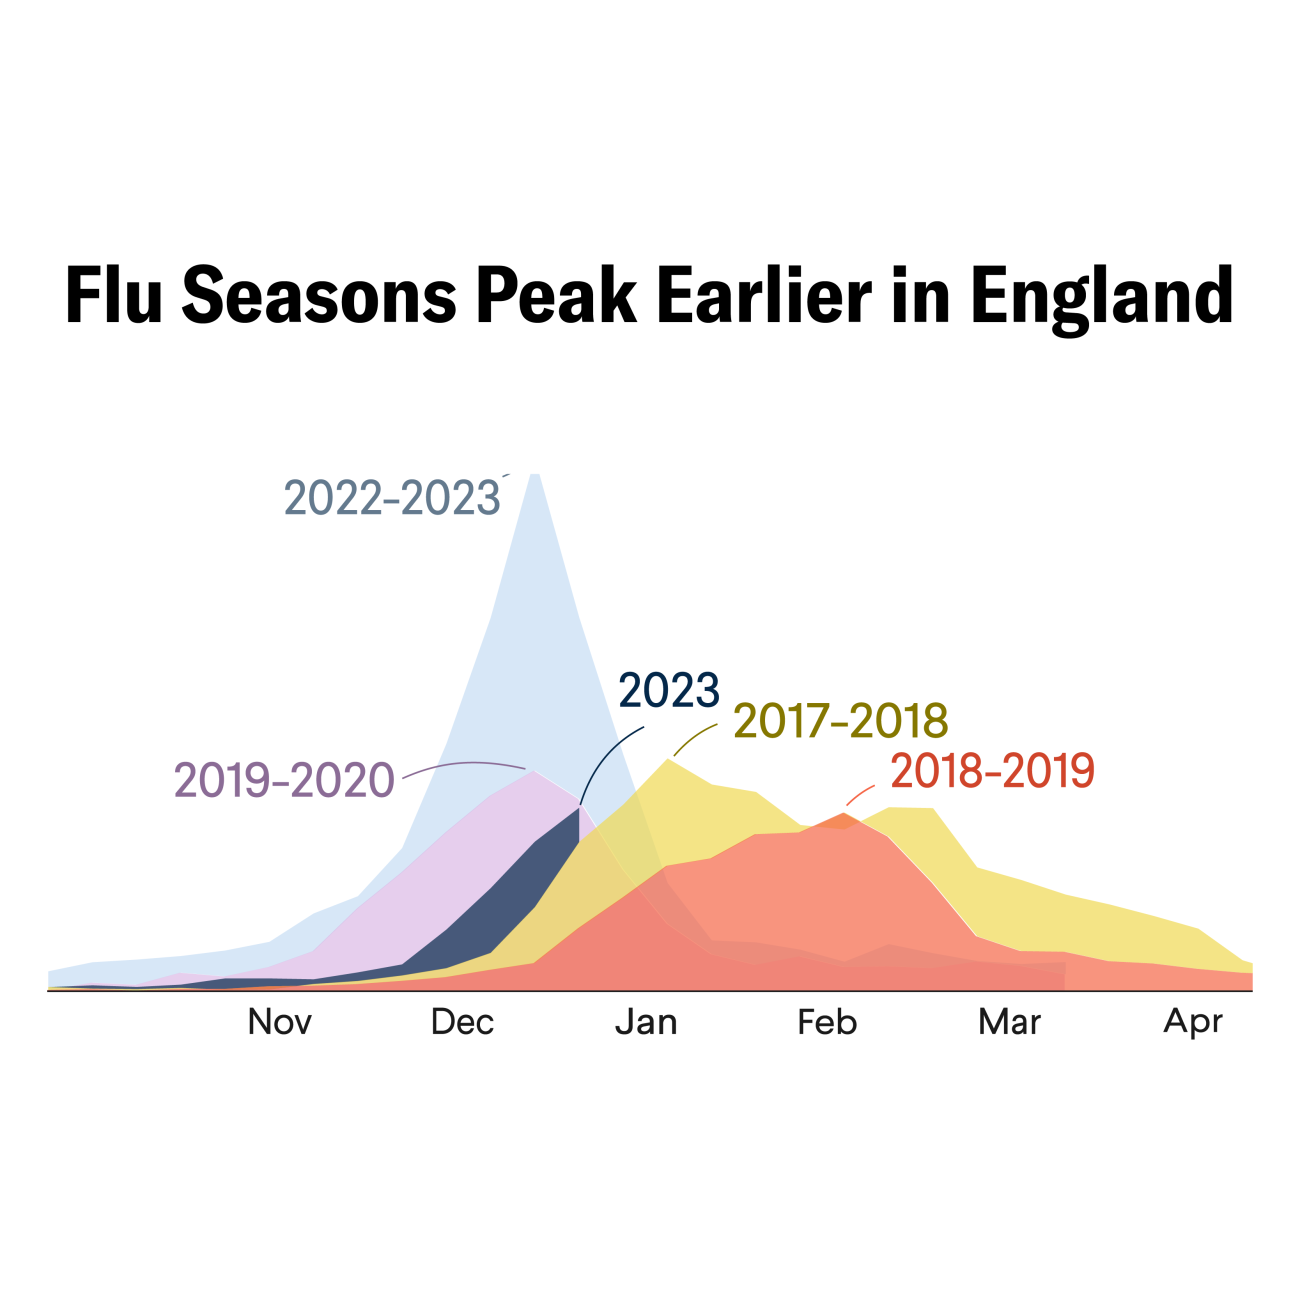 Flue and RSV peaked earlier than usual in England